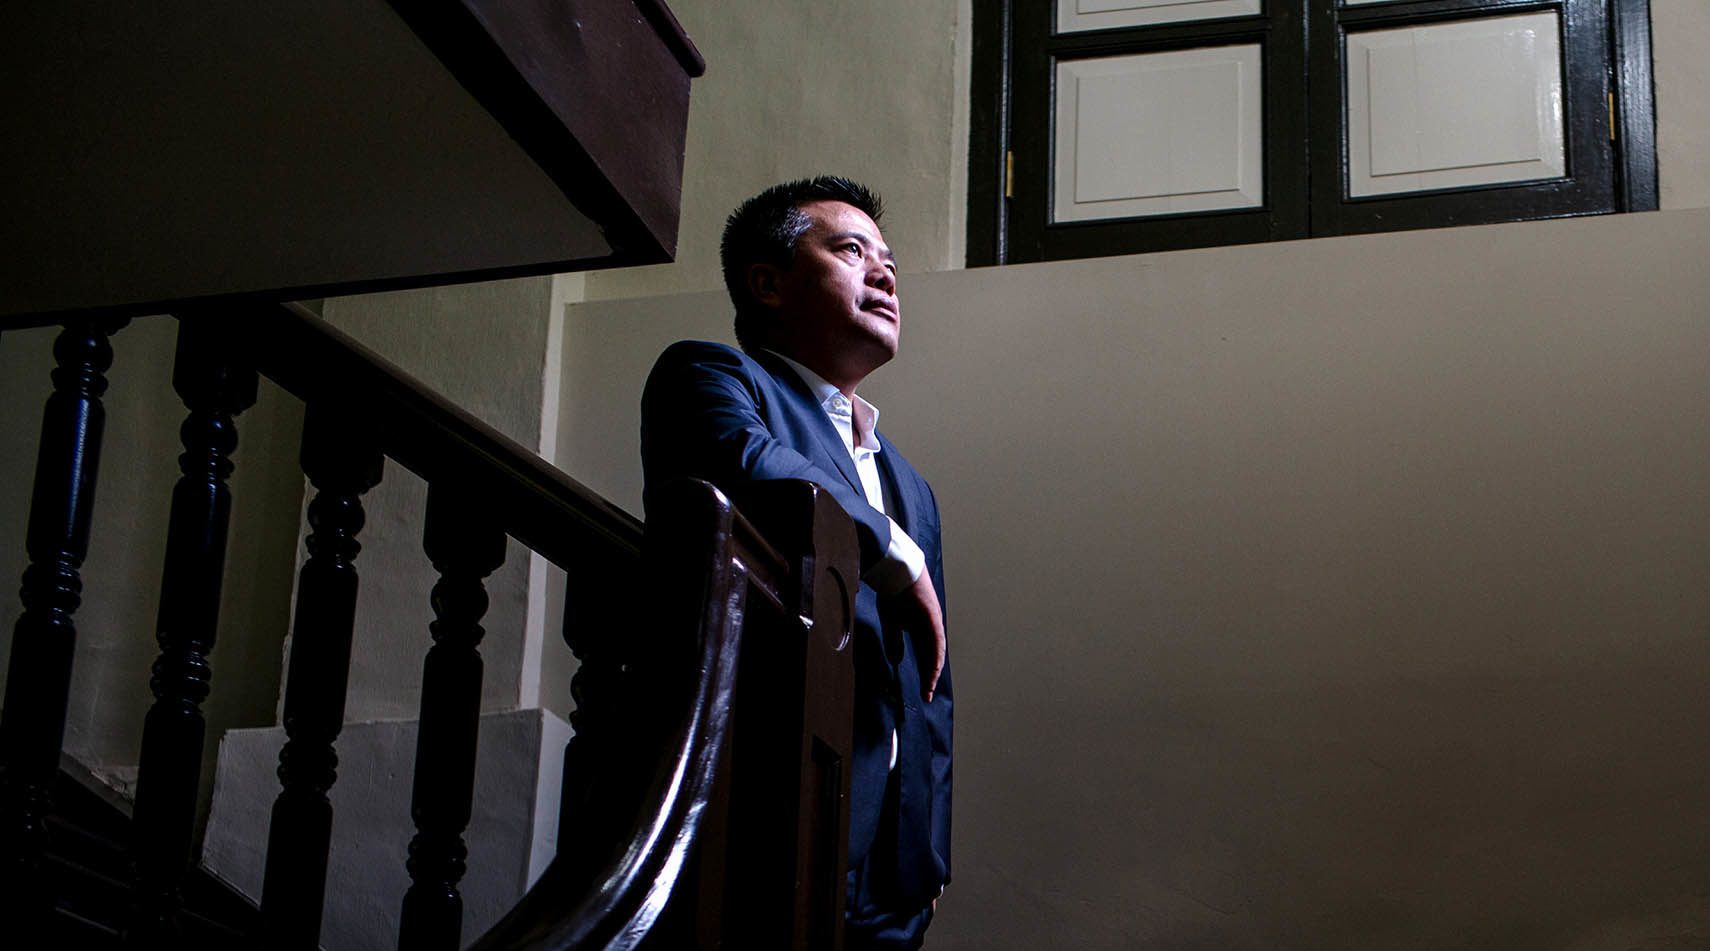 Shanda founder Chen, the missing China mogul, returns with $1b for brain research